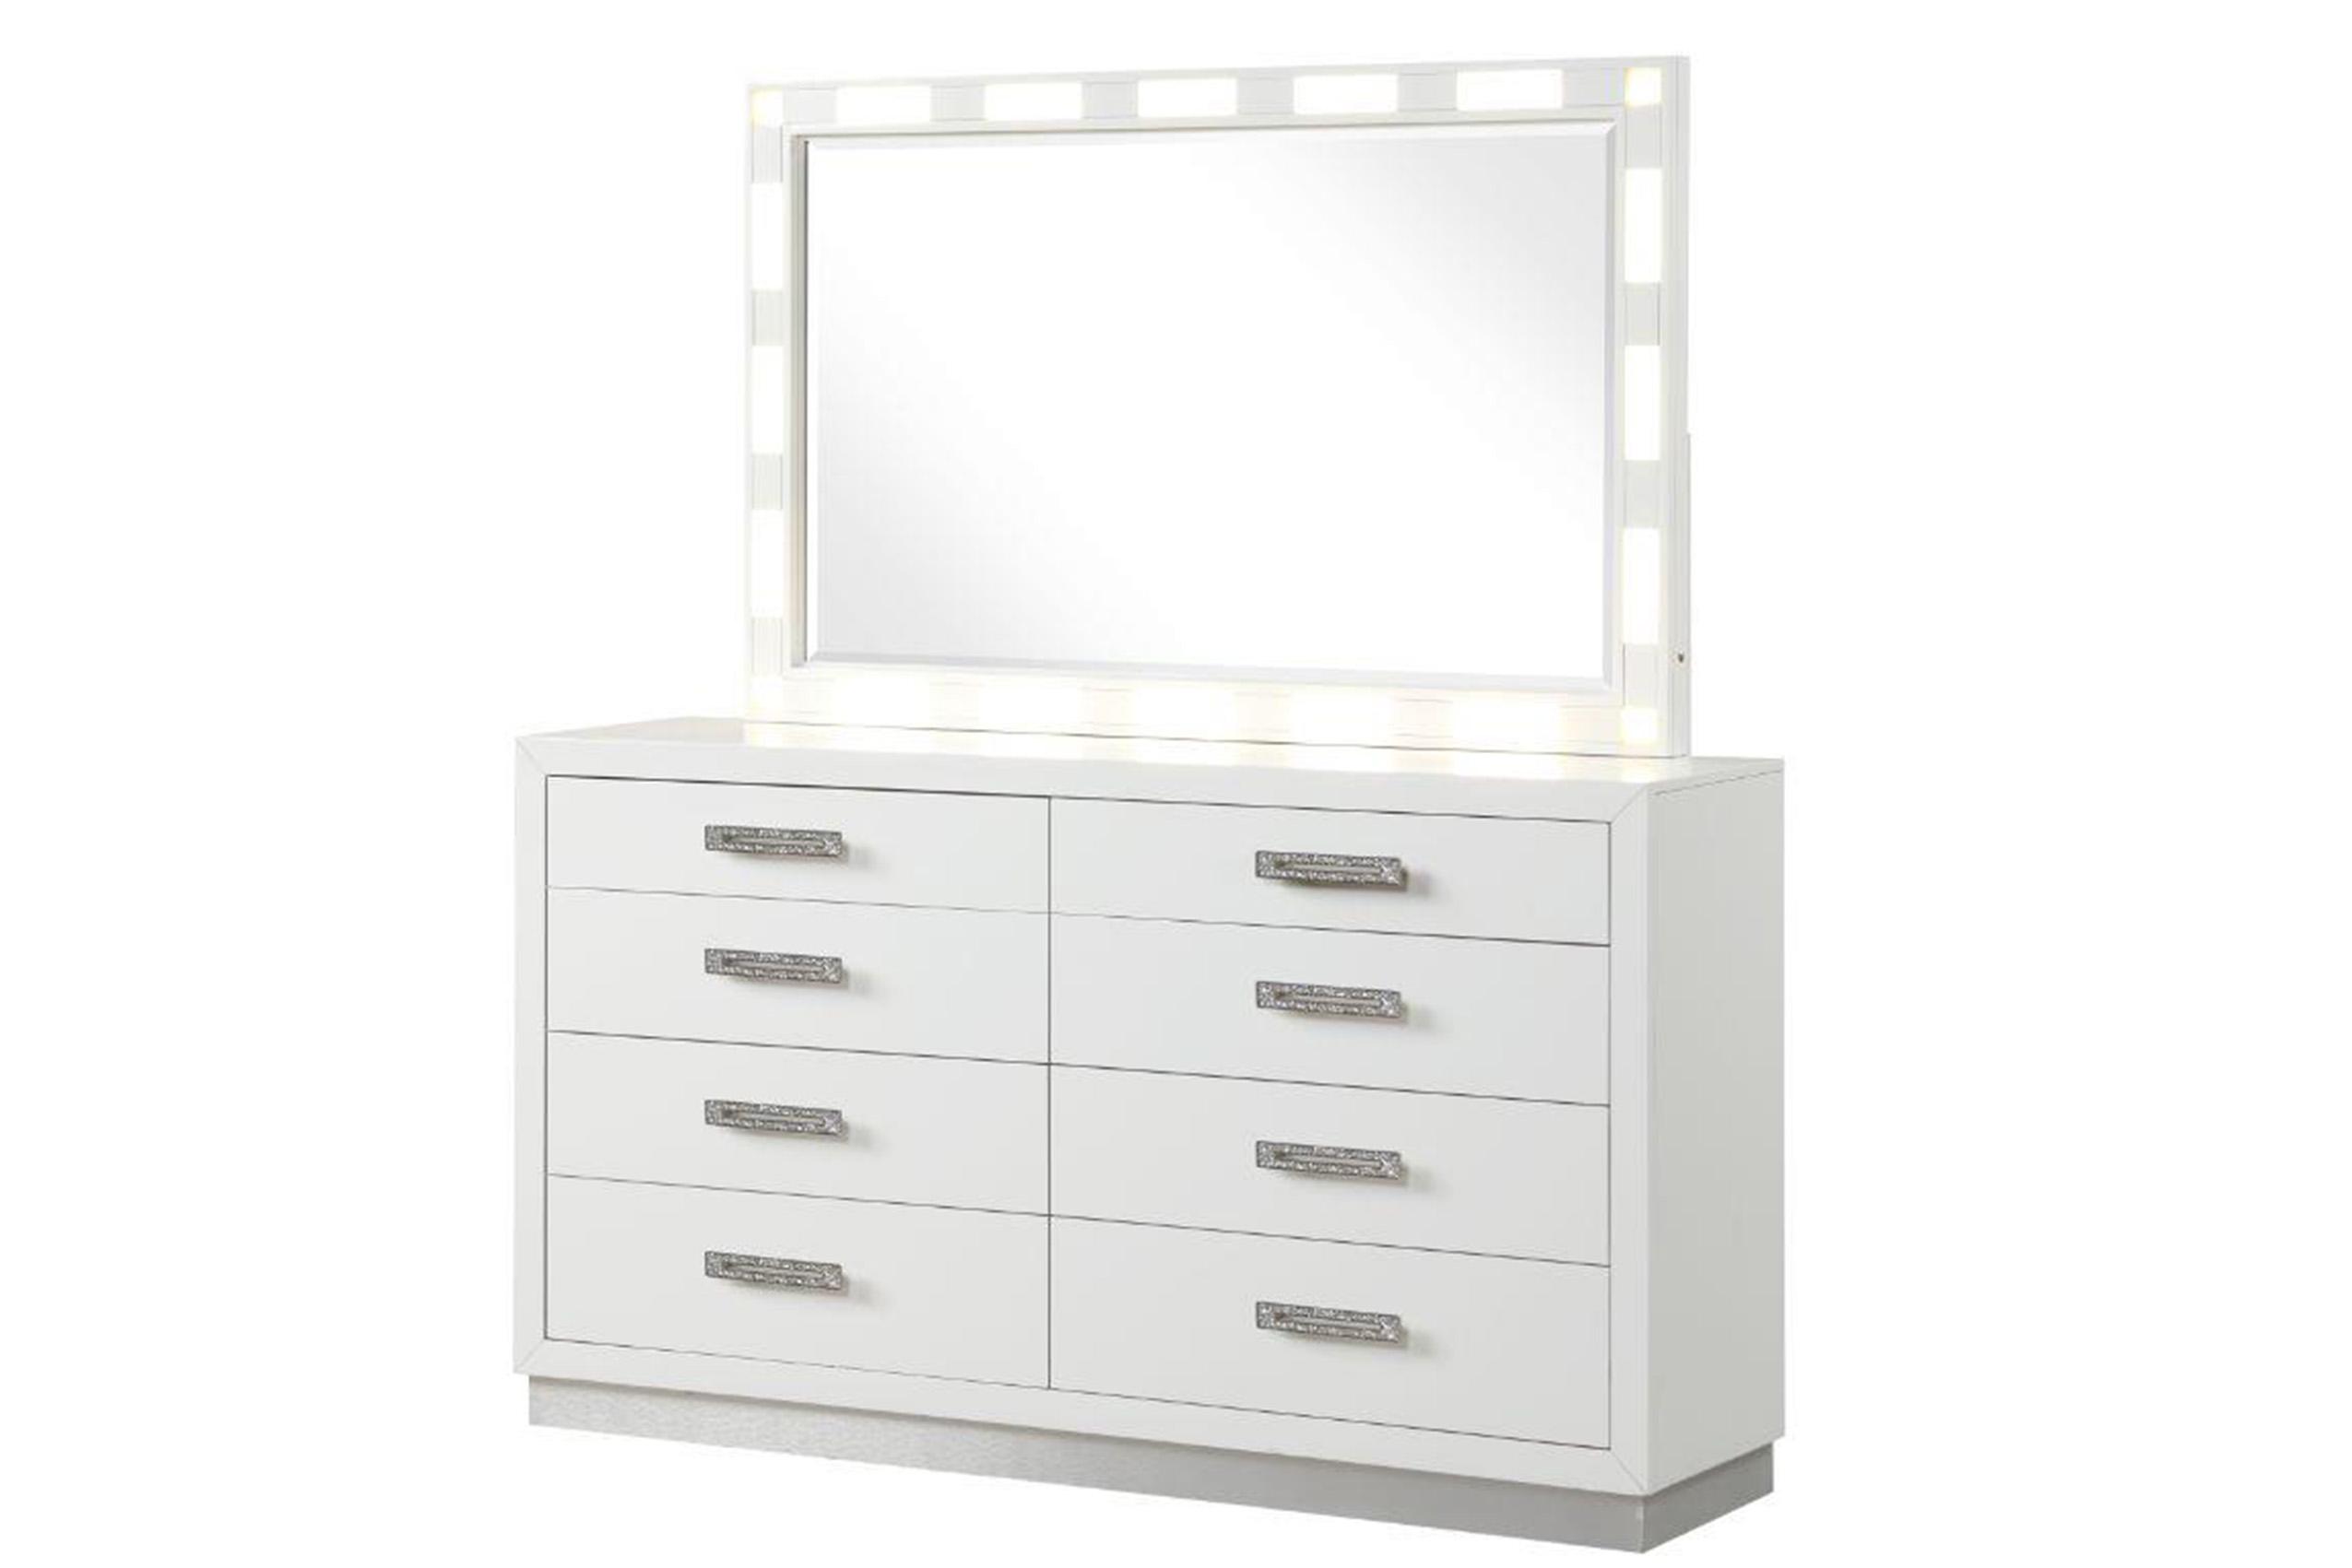 Contemporary, Modern Dresser With Mirror COCO-DR+MR-Set COCO-DR+MR-Set-2 in White 